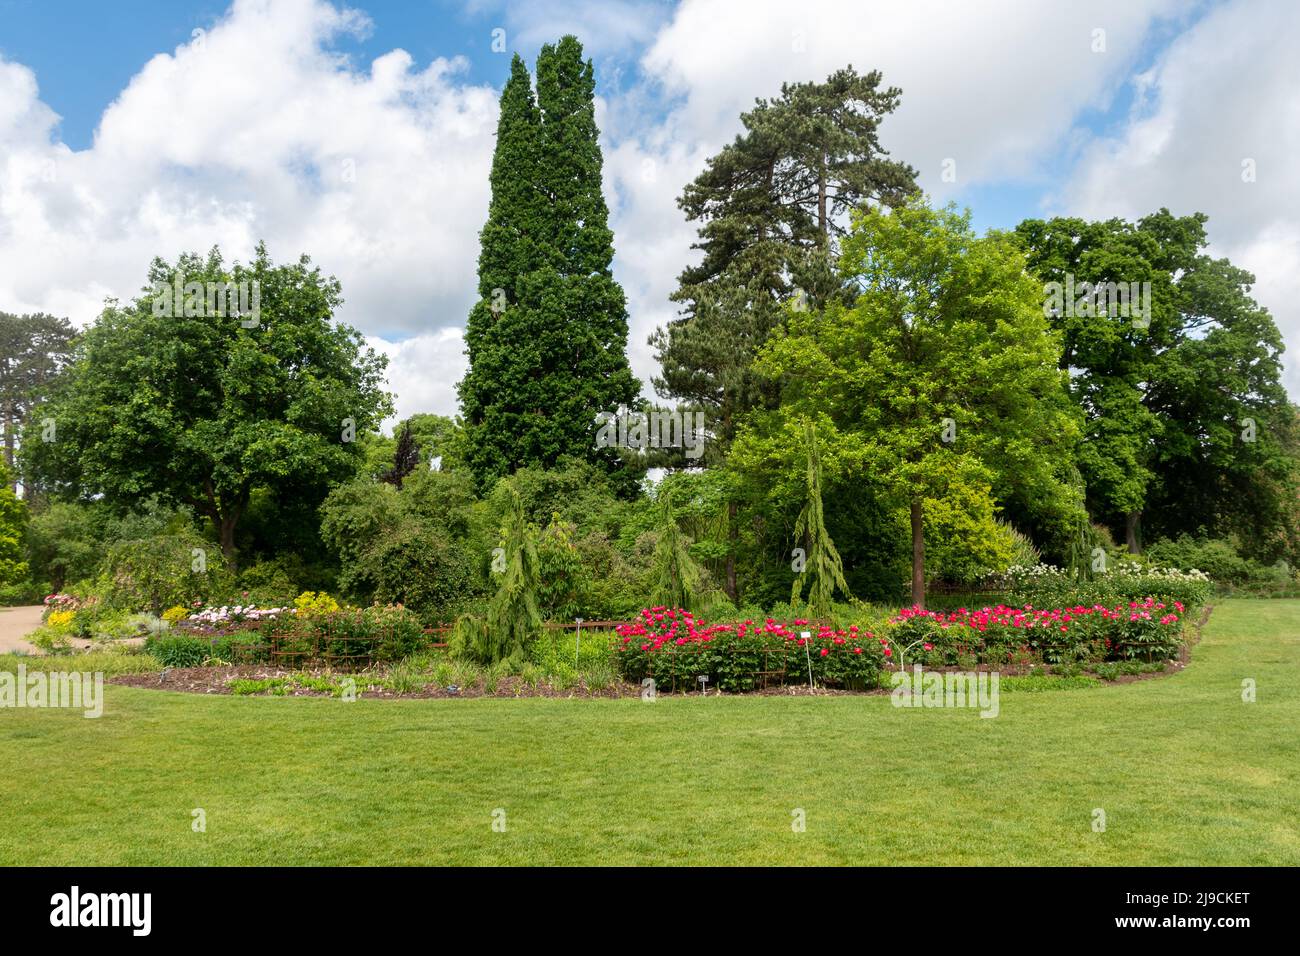 RHS Wisley Garden, May view with pink peonies in flower and trees, Surrey, England, UK Stock Photo